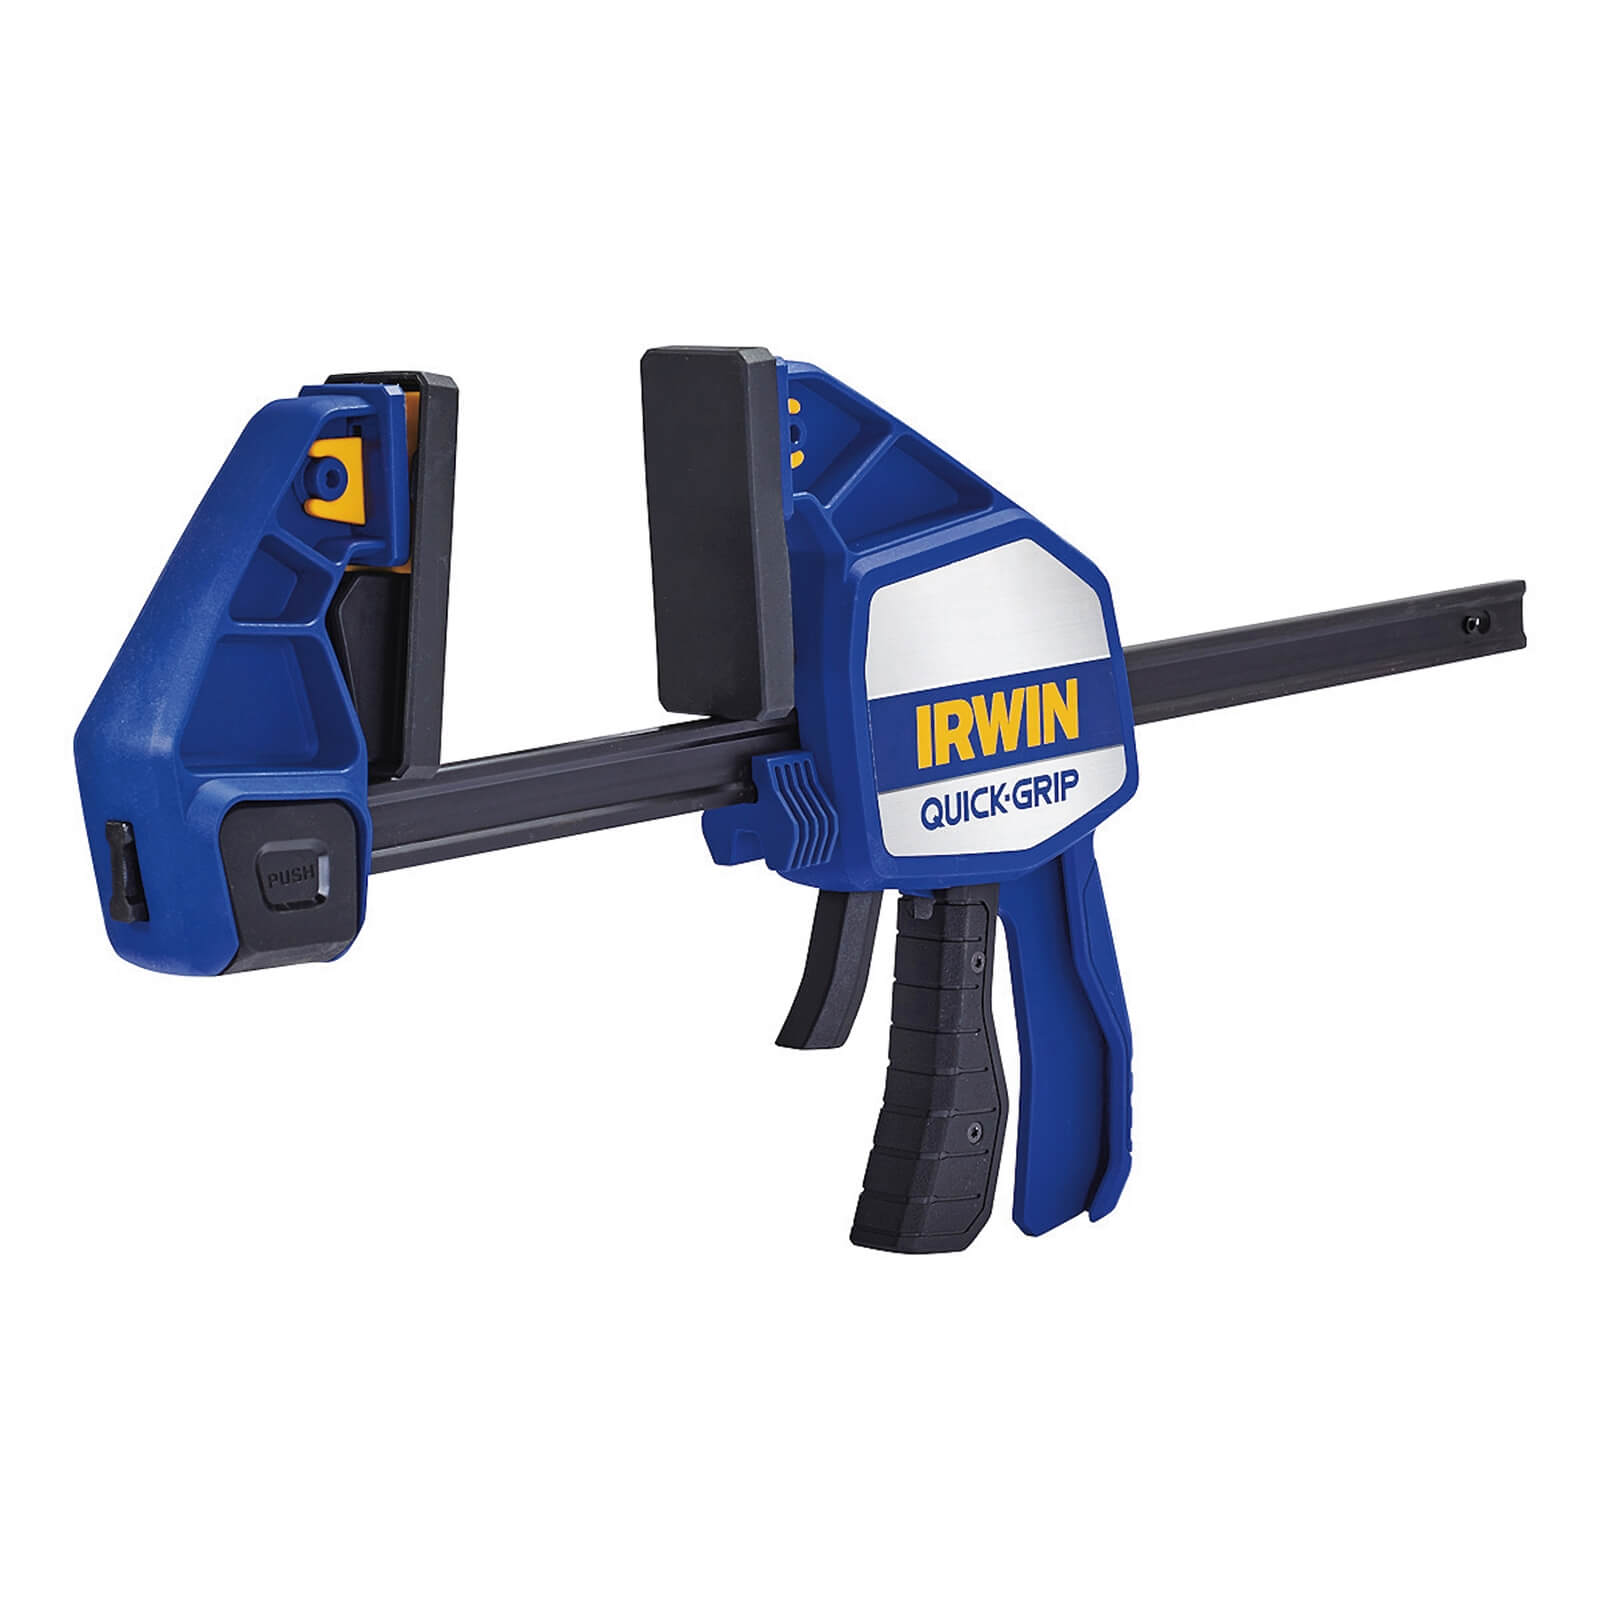 Irwin Quick-Grip Heavy Duty One-Handed Bar Clamp/Spreader - 300mm